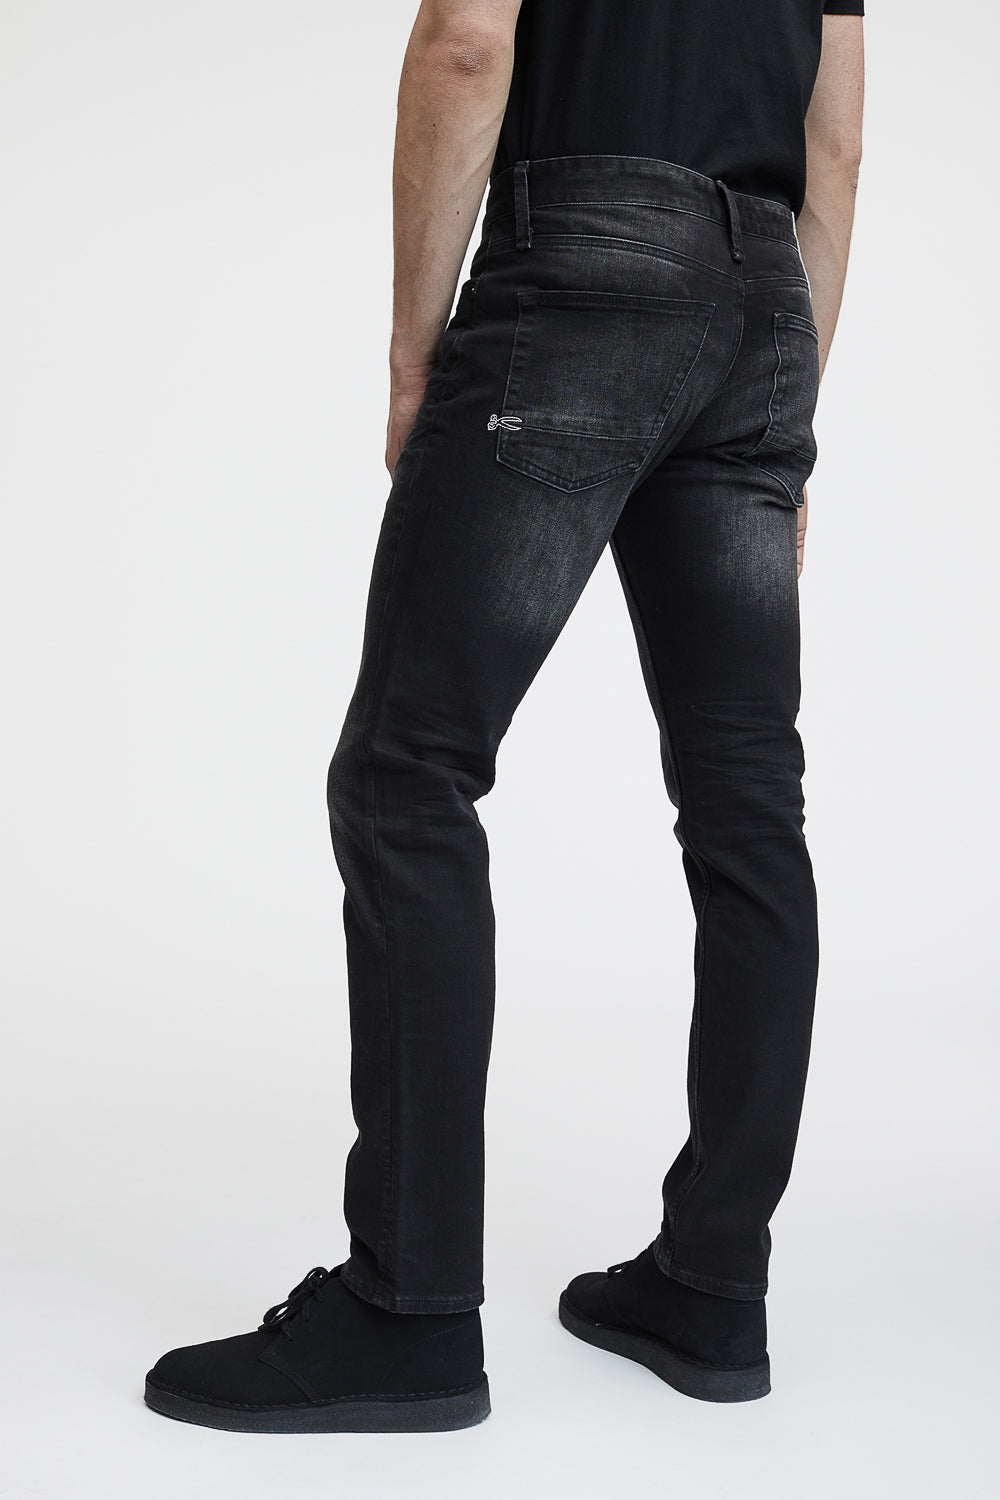 Buy the Denham Razor Aceb Jeans in Black at Intro. Spend £50 for free UK delivery. Official stockists. We ship worldwide.